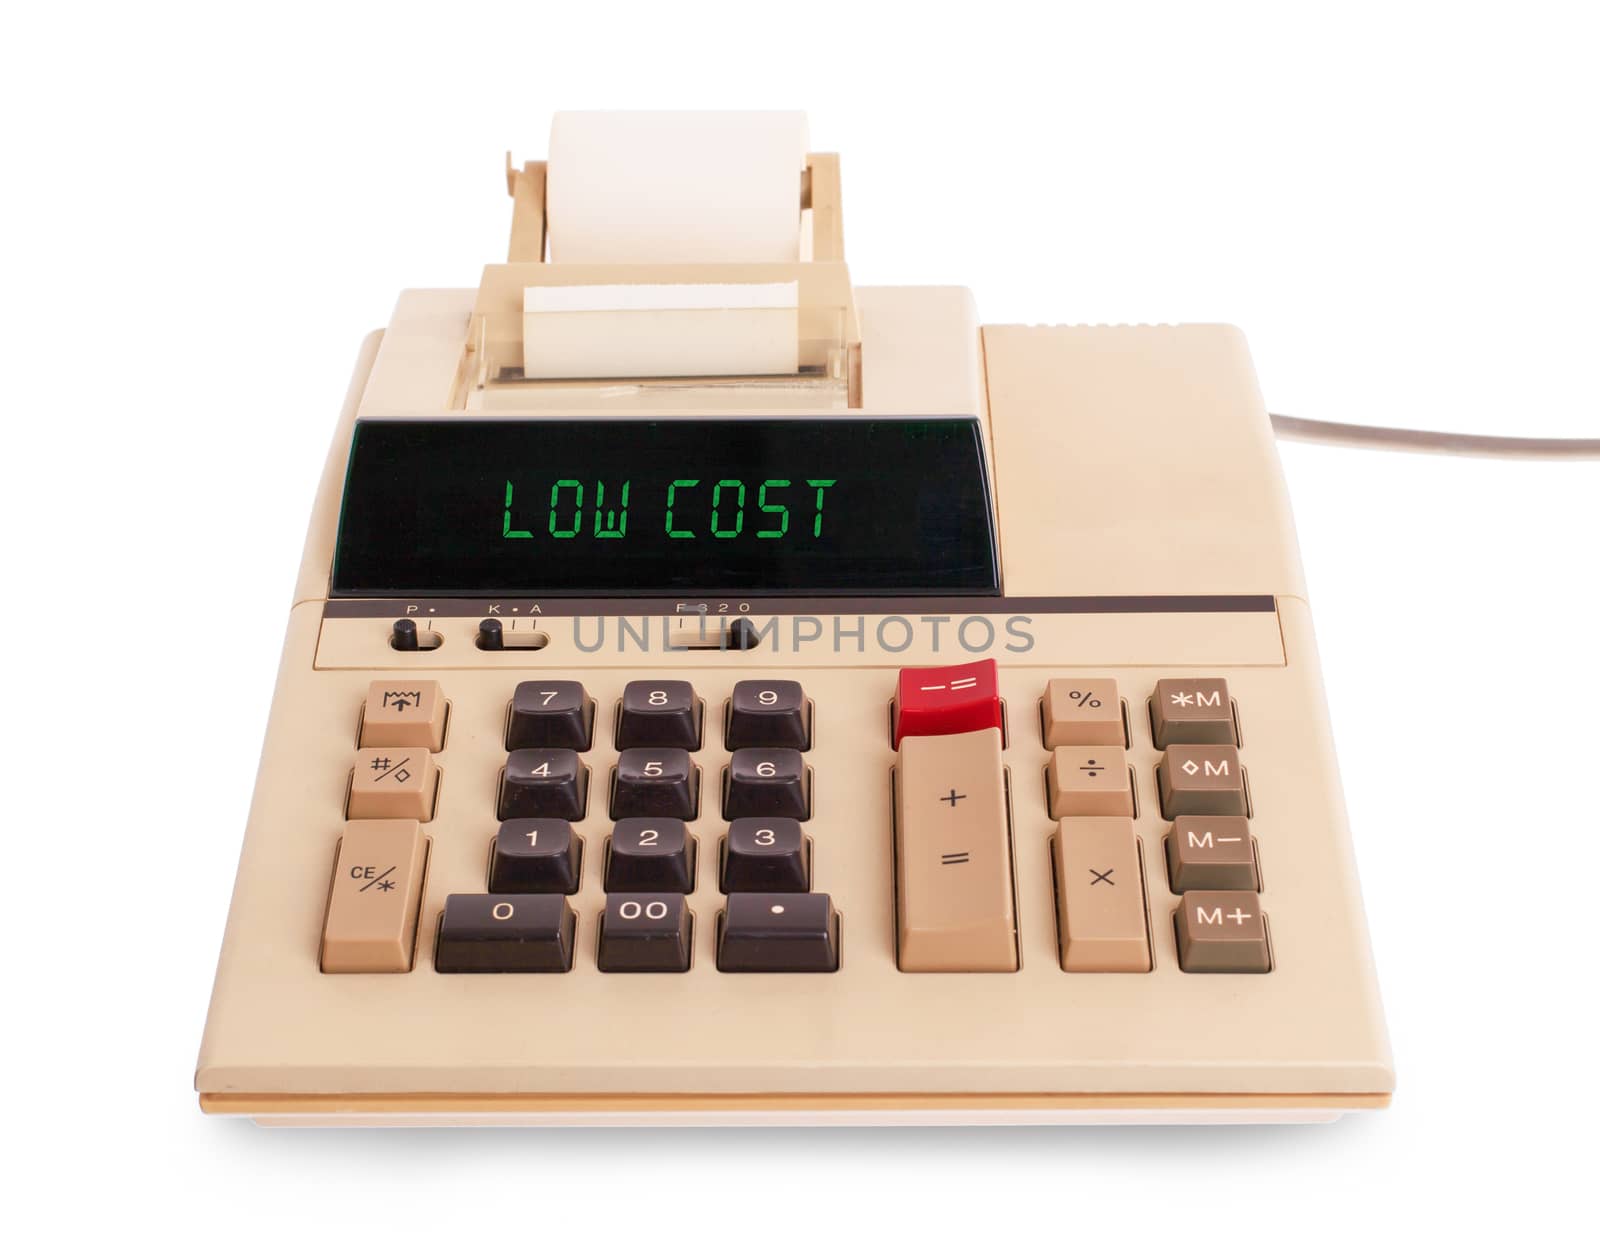 Old calculator - low cost by michaklootwijk